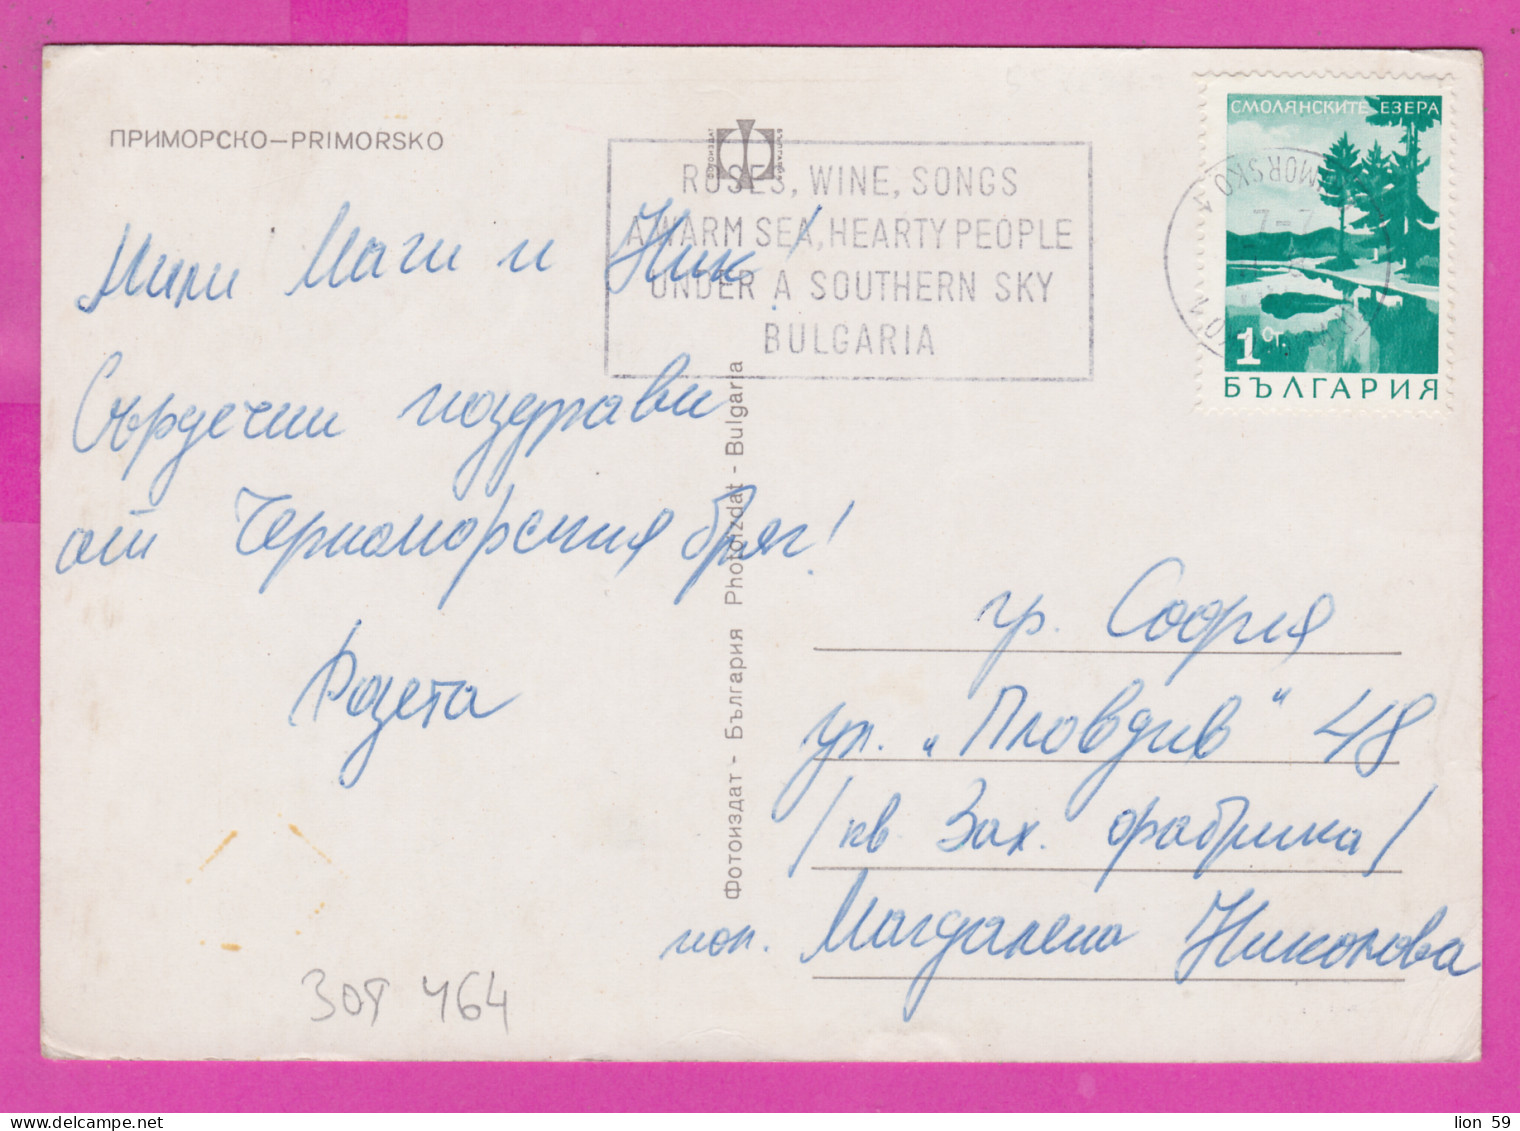 309464 / Primorsko - Camping "Perla" PC USED  Roses Wine, Songs, Aearm Sea,Hearty People Under A Southern Sky Bulgaria - Covers & Documents